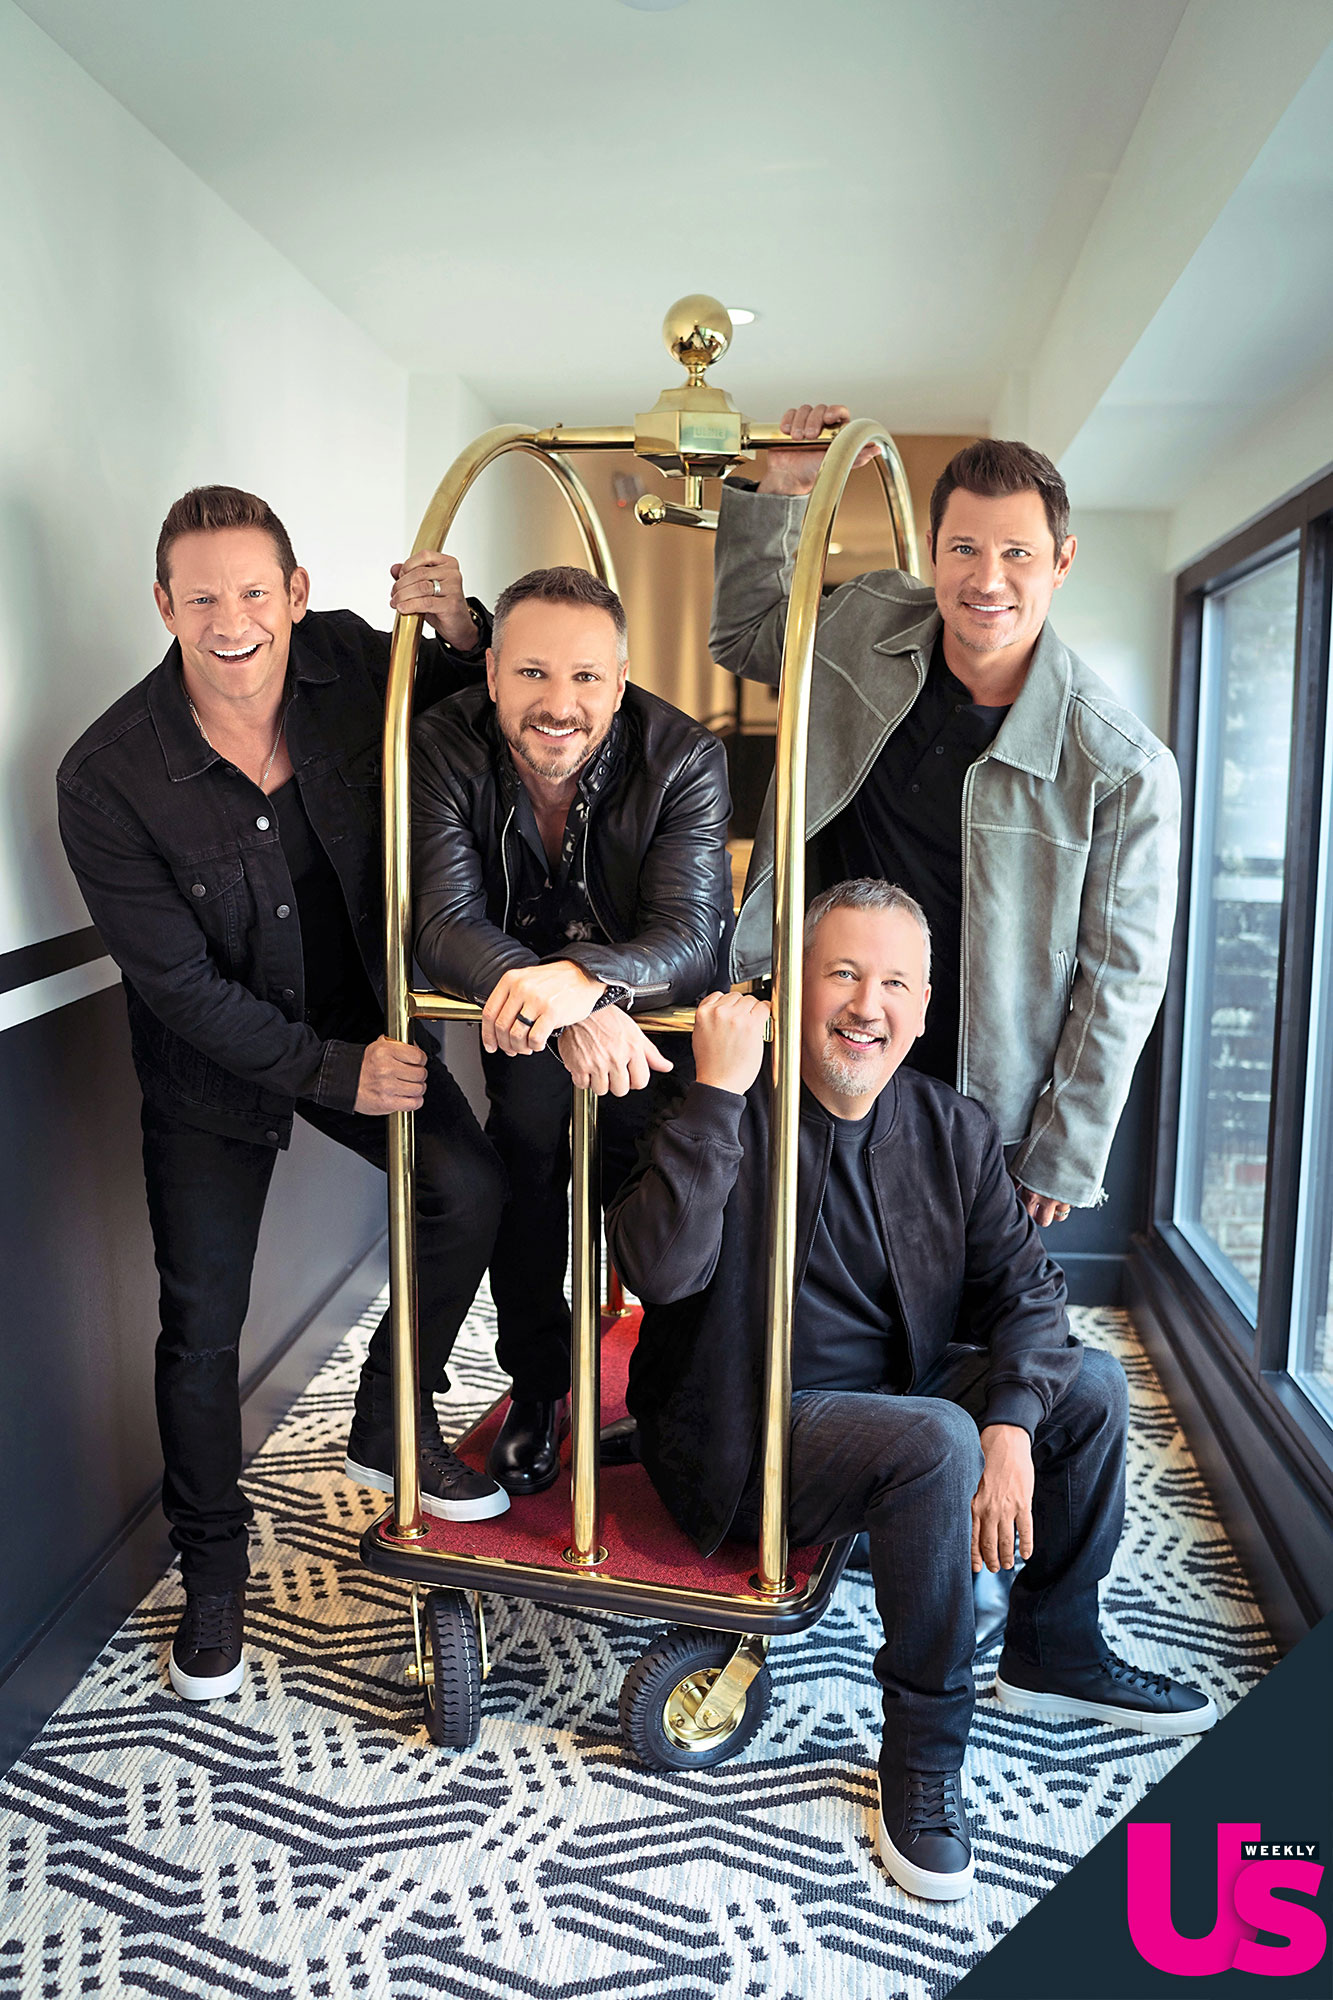 98 Degrees Are Back! The Guys Talk New Music, Tour Life, '90s